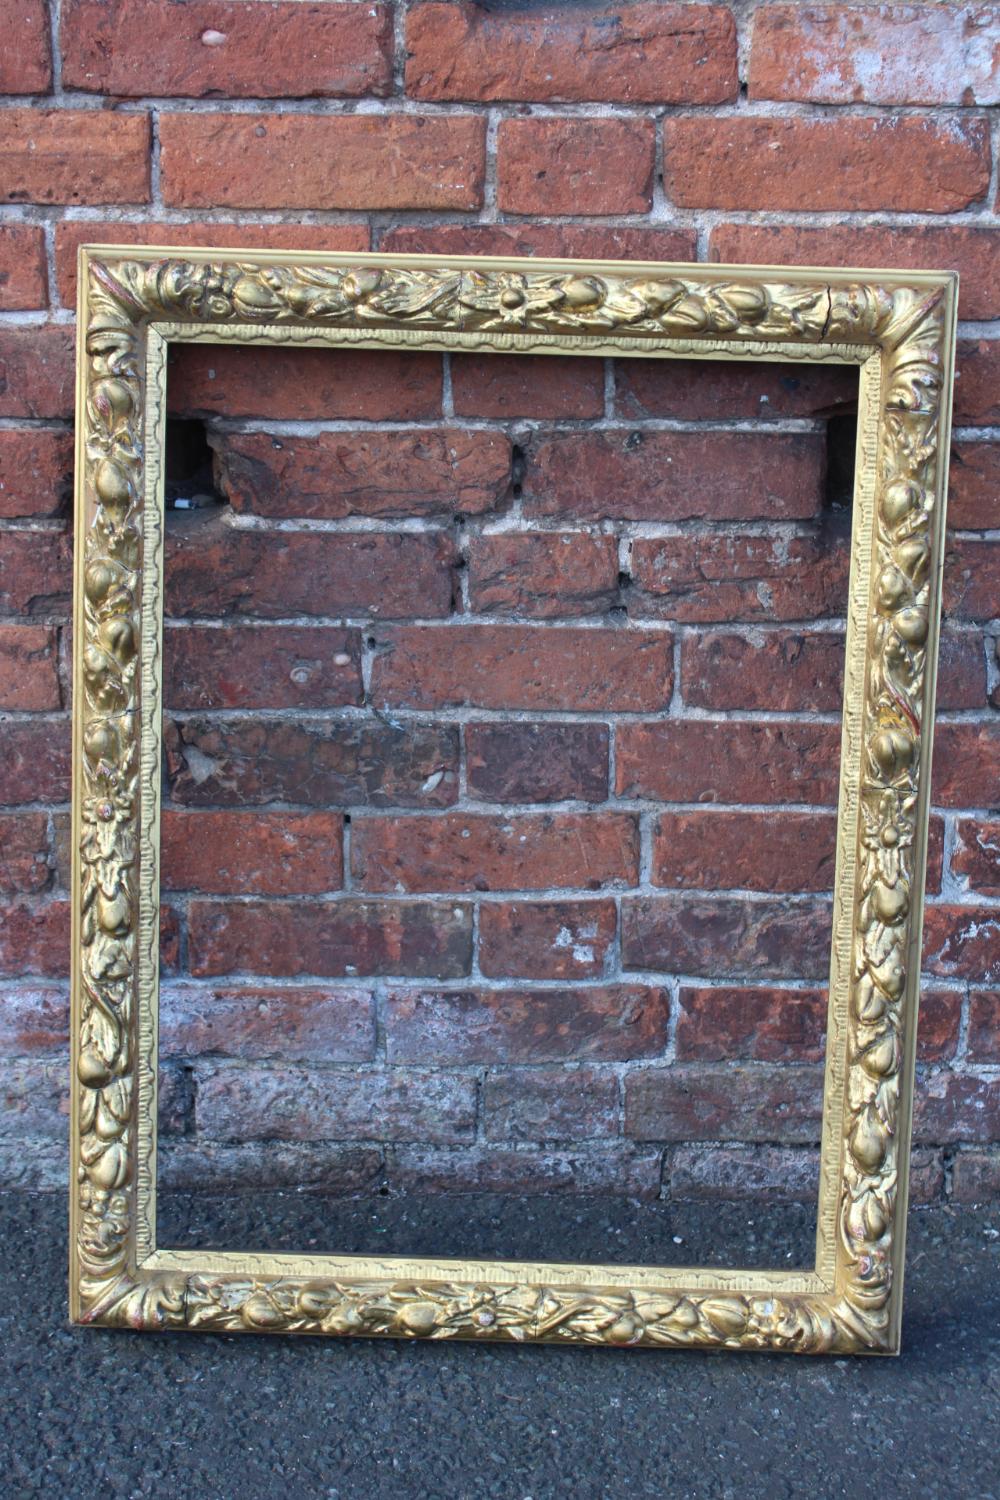 A LATE 18TH / EARLY 19TH CENTURY DECORATIVE GOLD FRAME WITH FRUIT DESIGN, frame W 7.5 cm, rebate